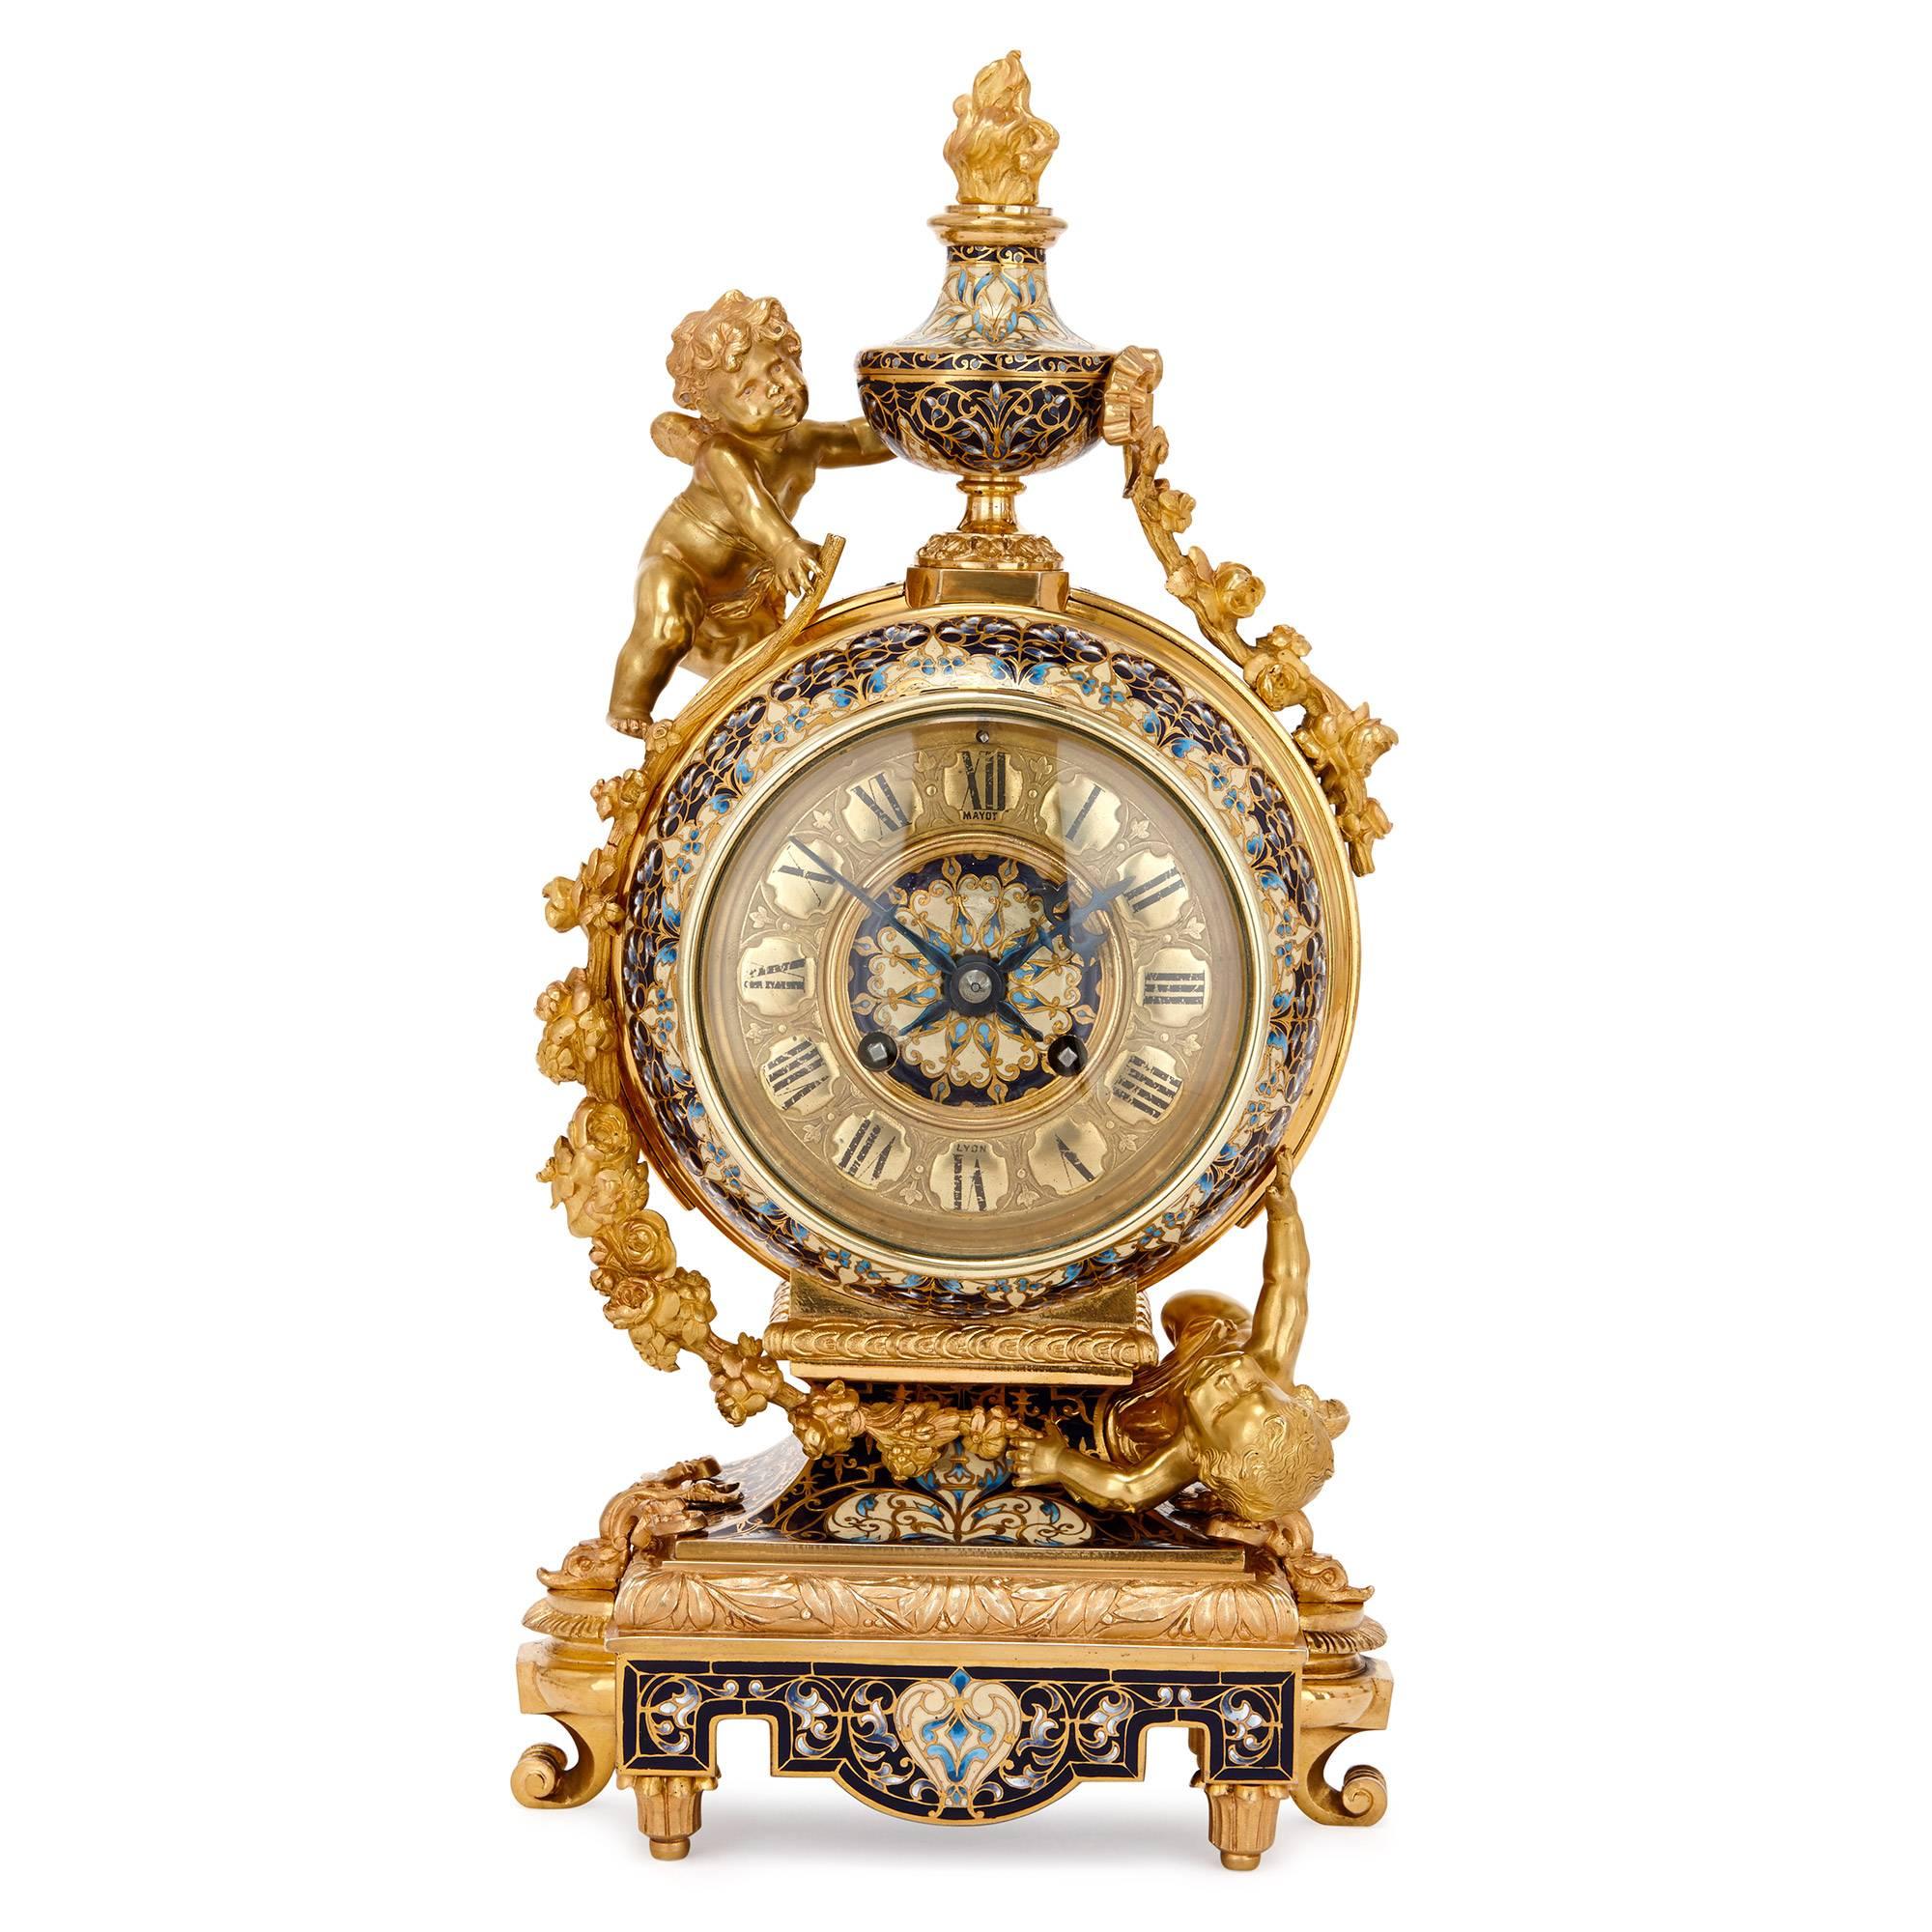 This exquisite five-piece antique French clock set is full of joyful Rococo exuberance and features delightful gilt bronze models of cherubs, together with some incredibly intricate floral cloisonné enamel work. The set consists of a central clock,